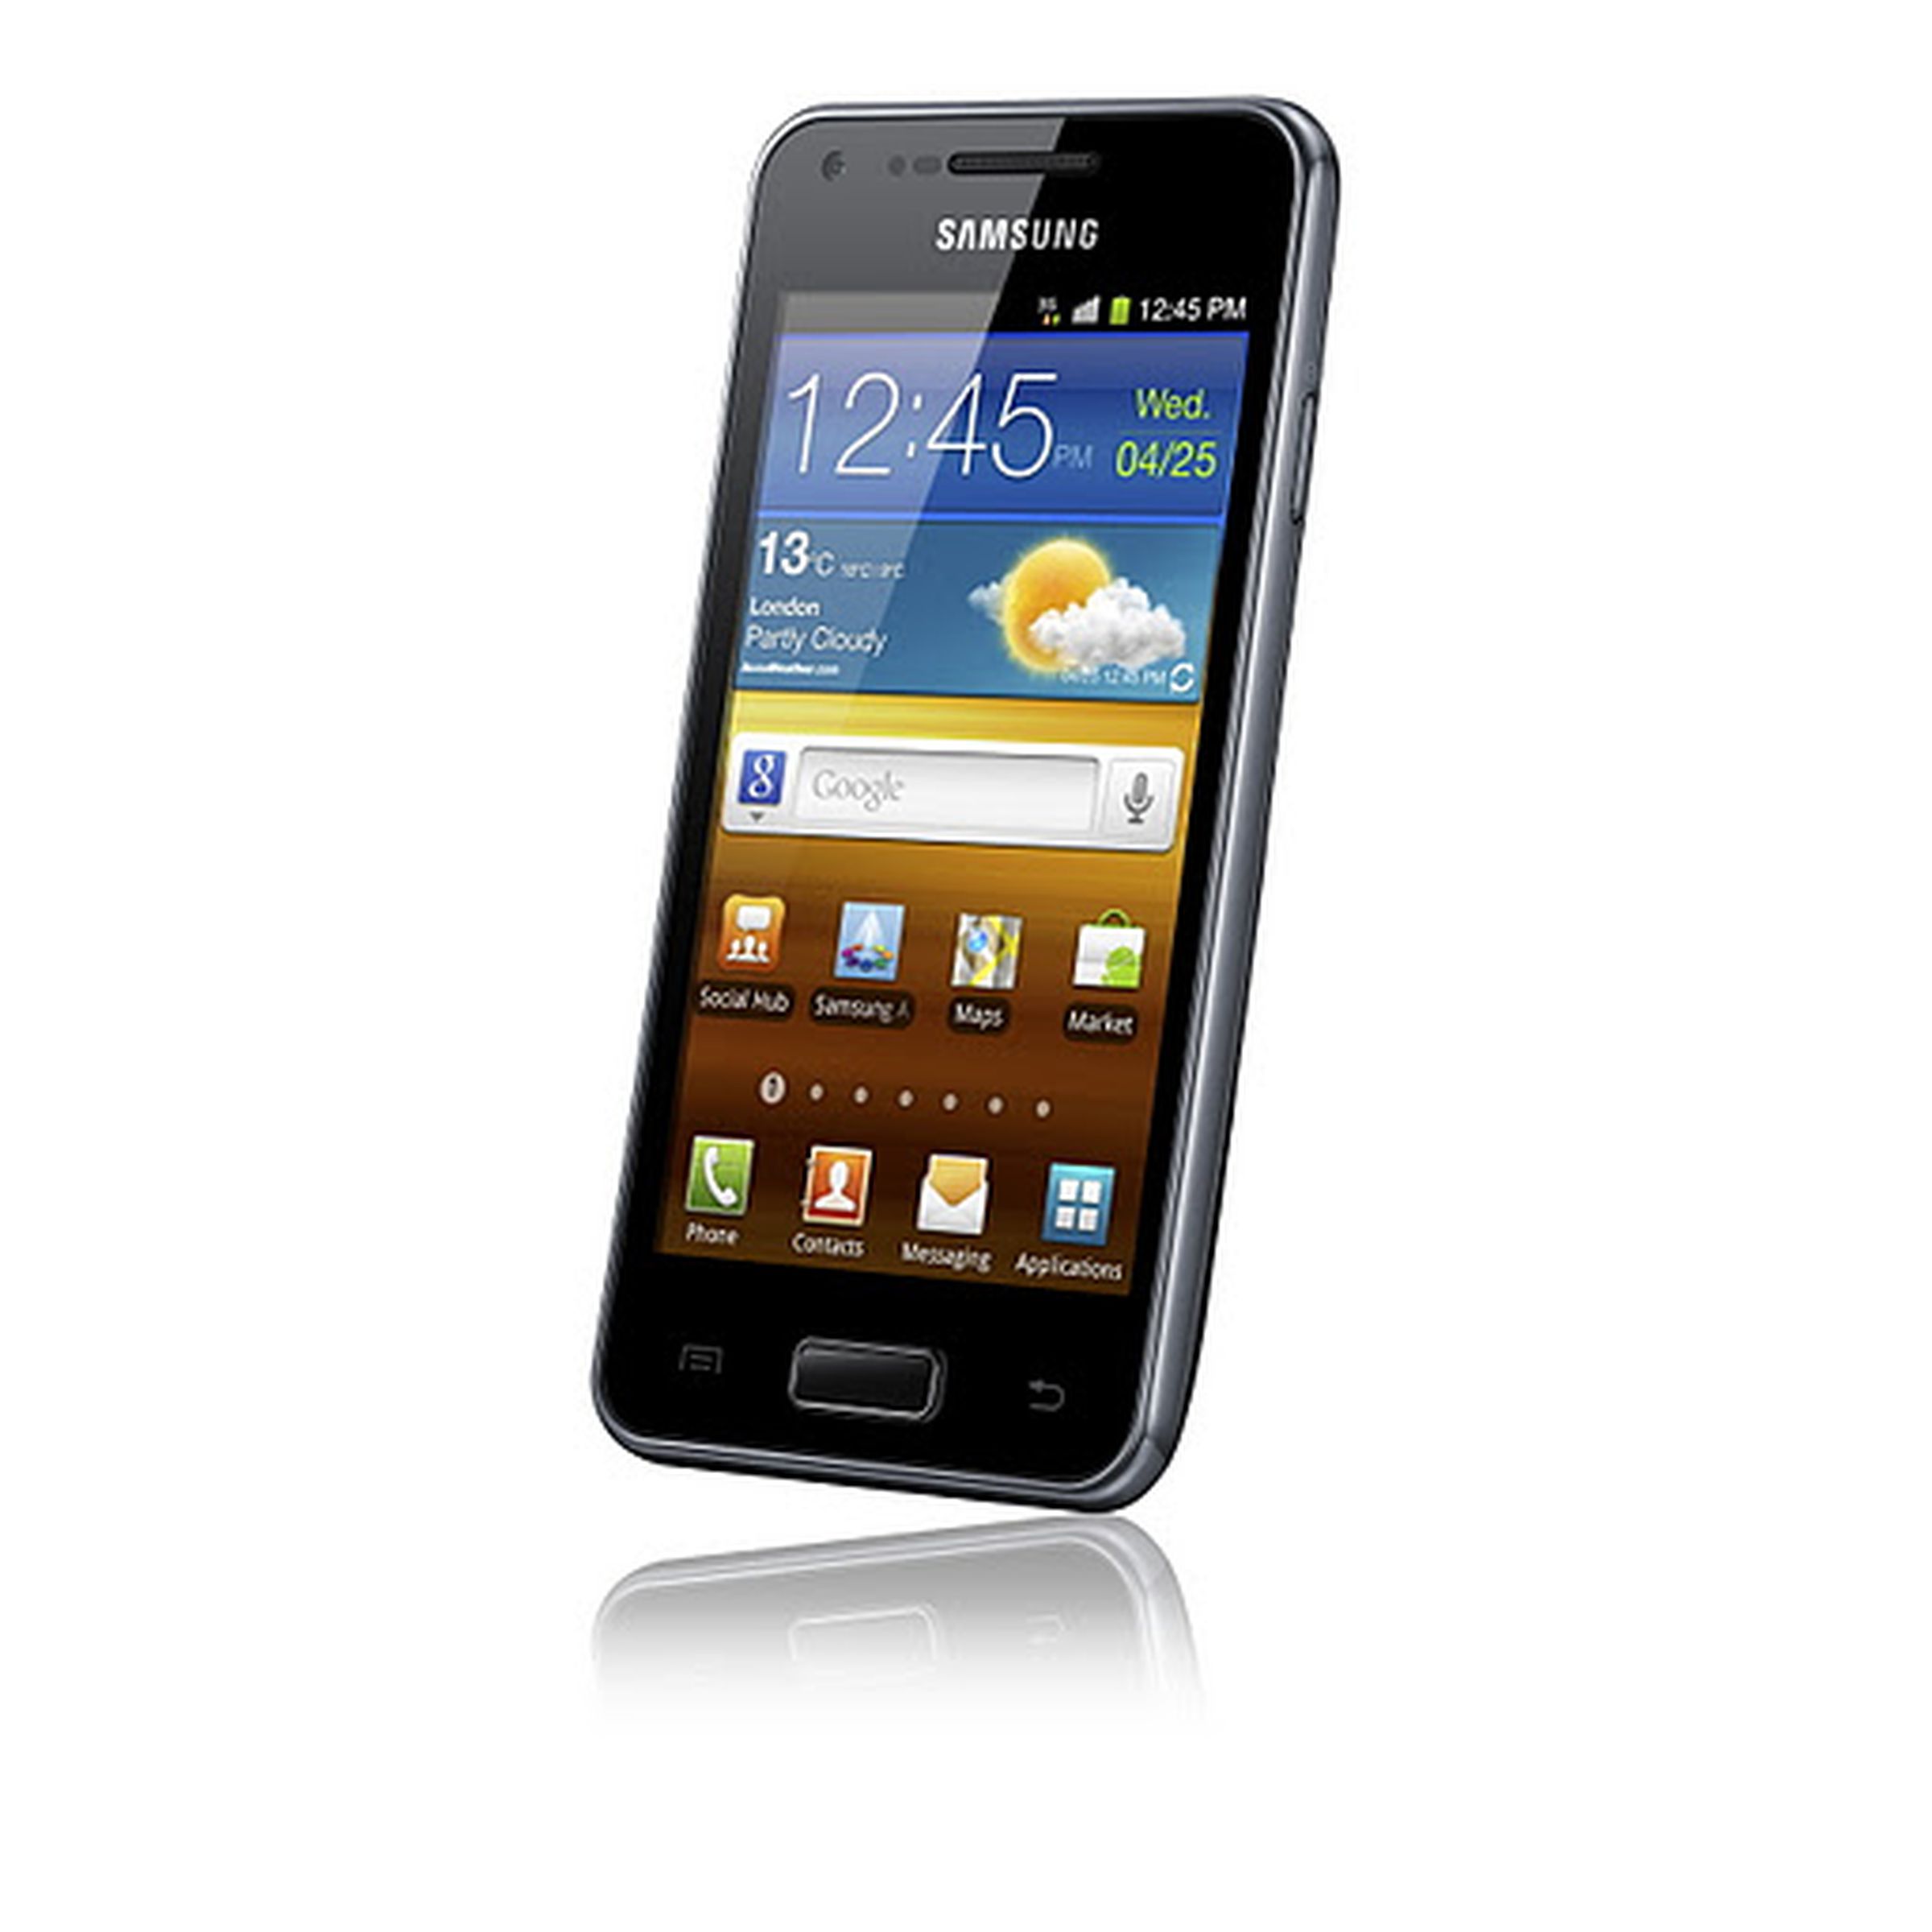 Galaxy S Advance product images